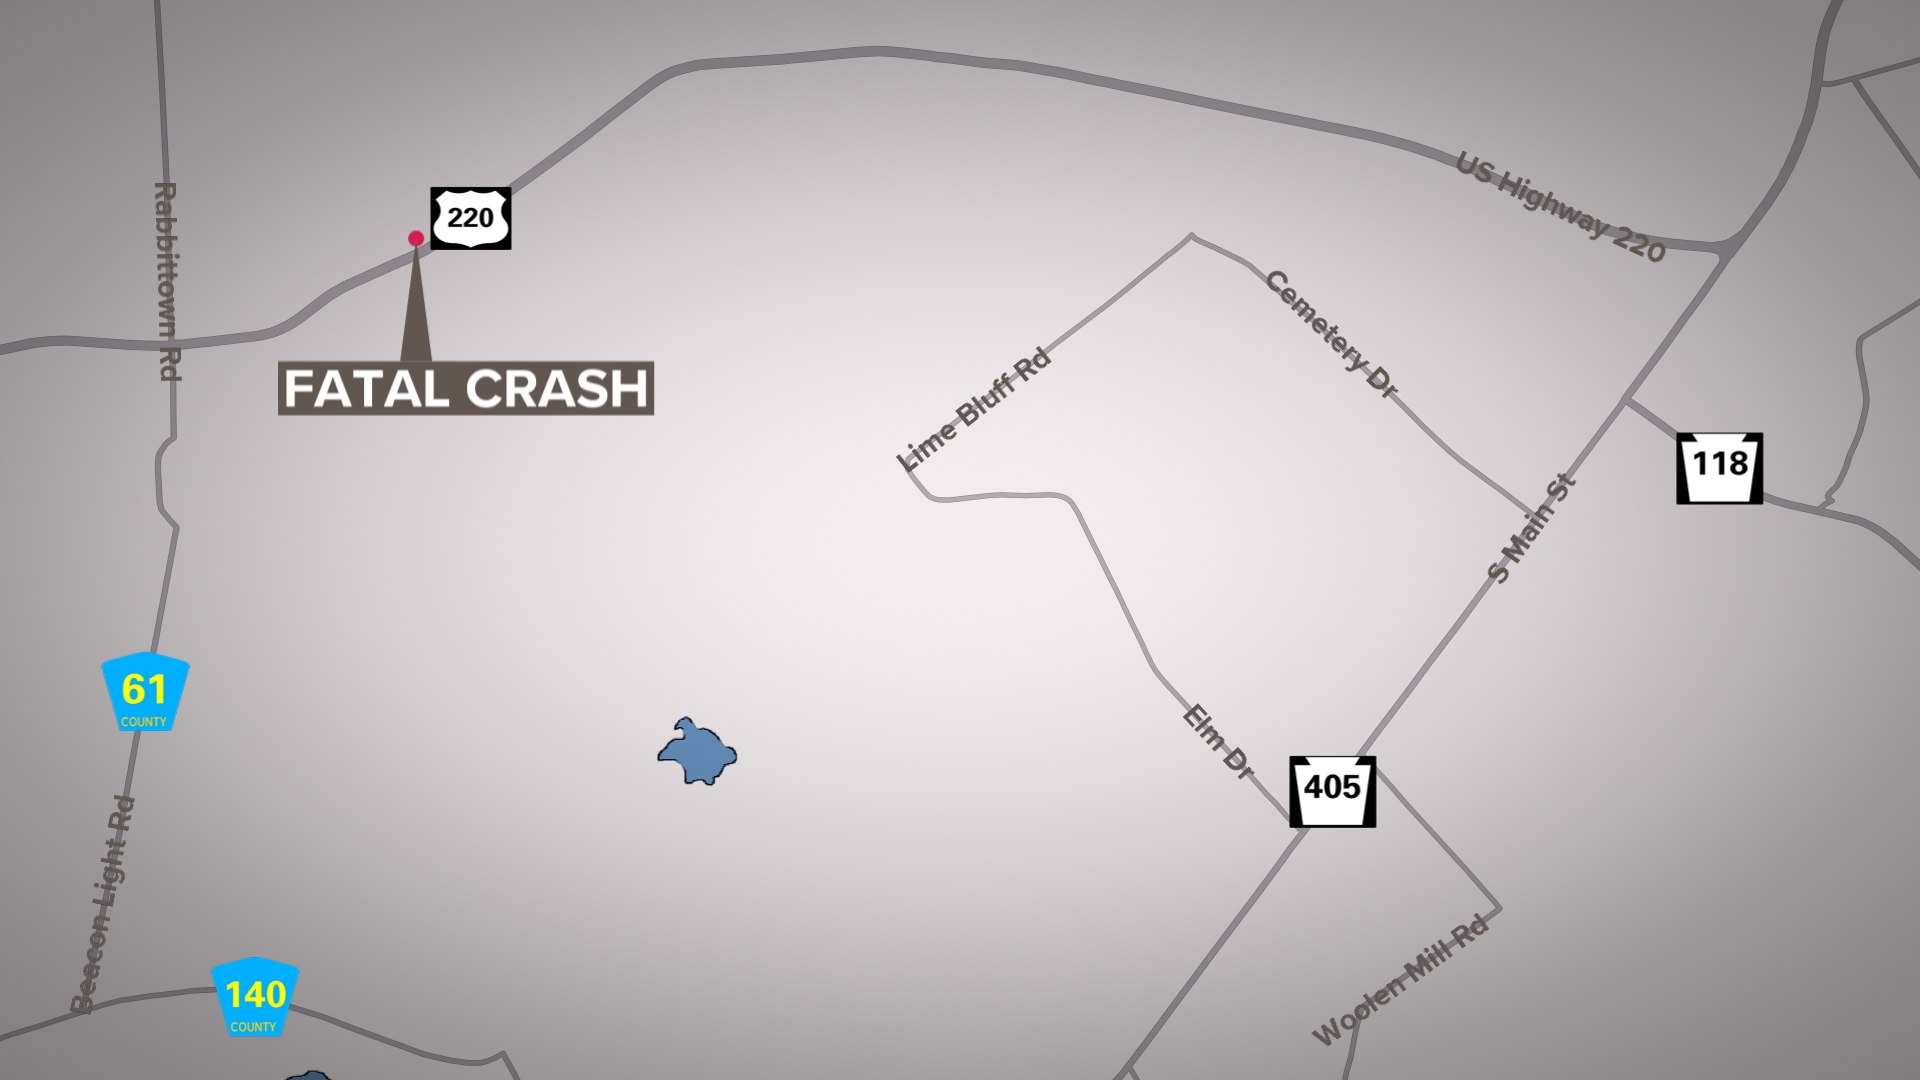 The fatal wreck happened just after noon on Saturday near Muncy.